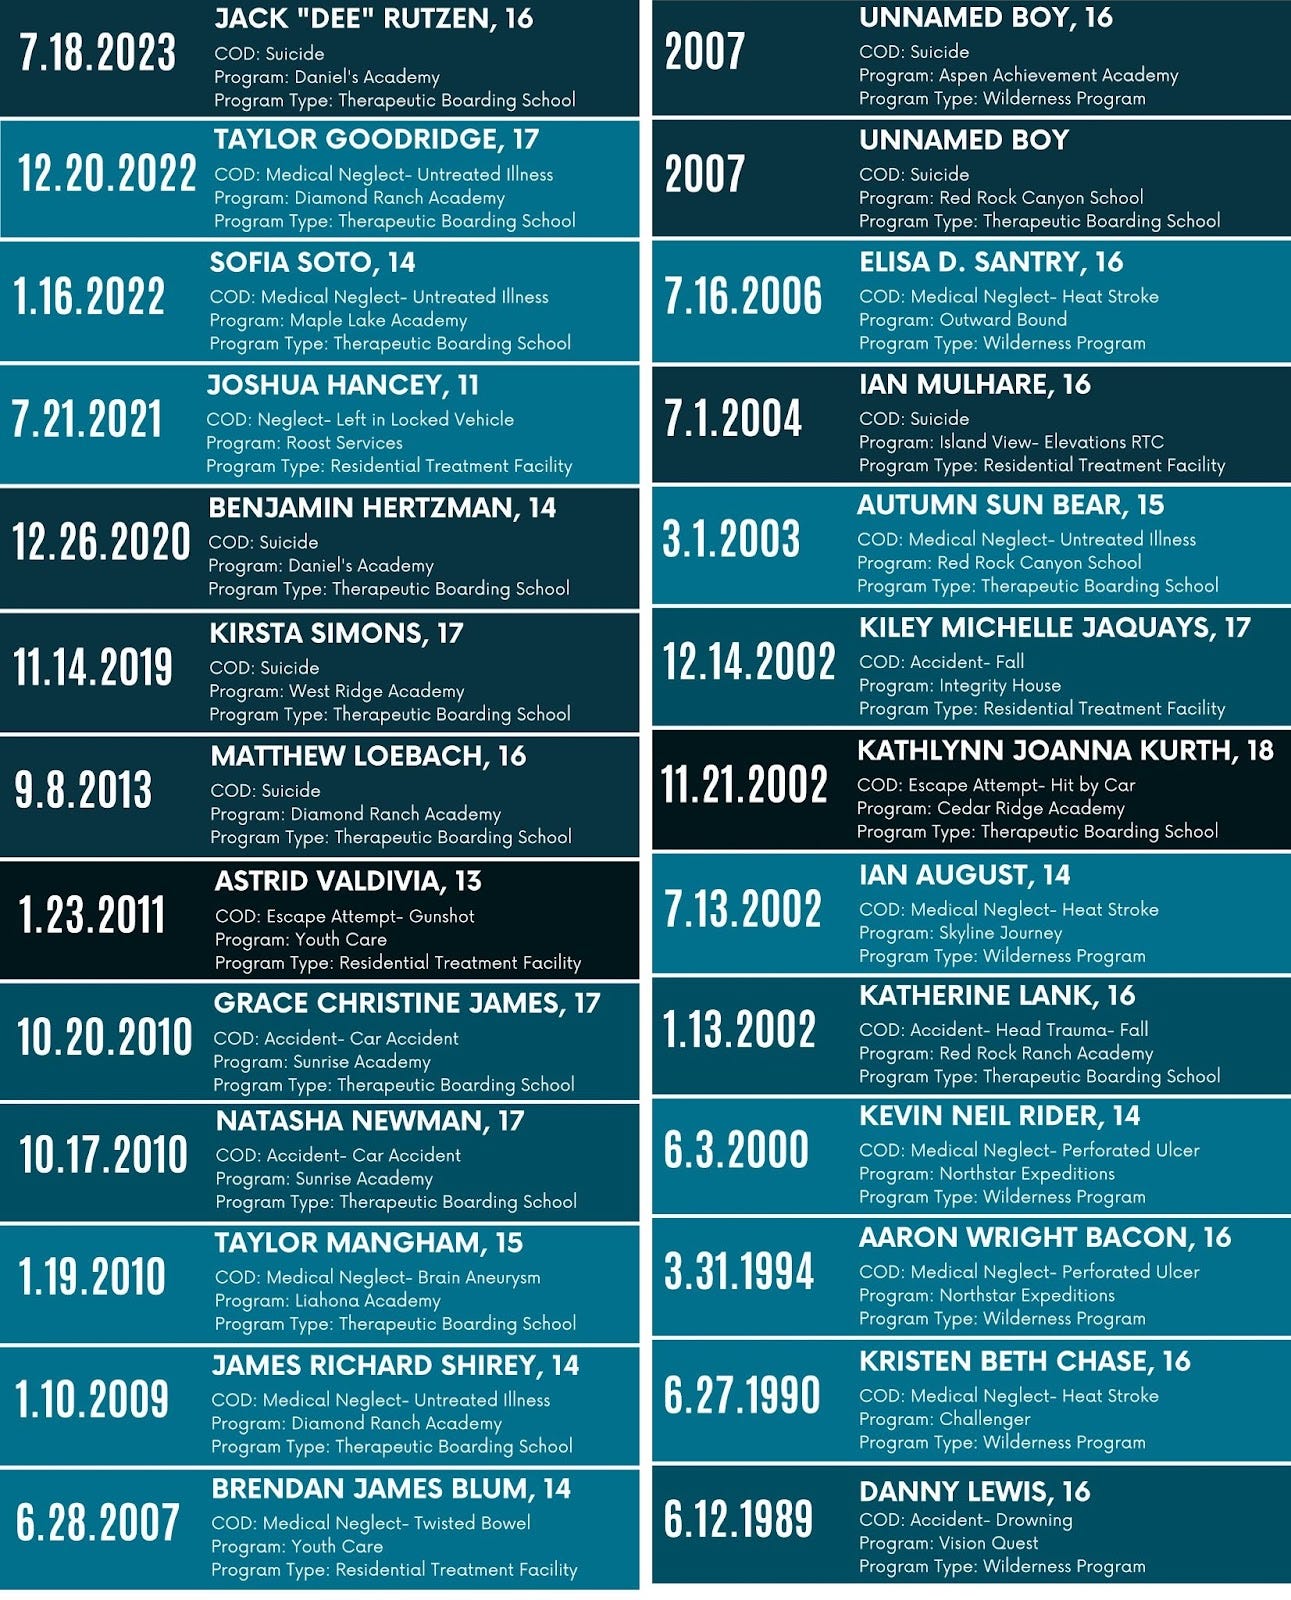 An infographic listing 26 deaths.  (For a text version of this infographic, contact MartyG Reports.)